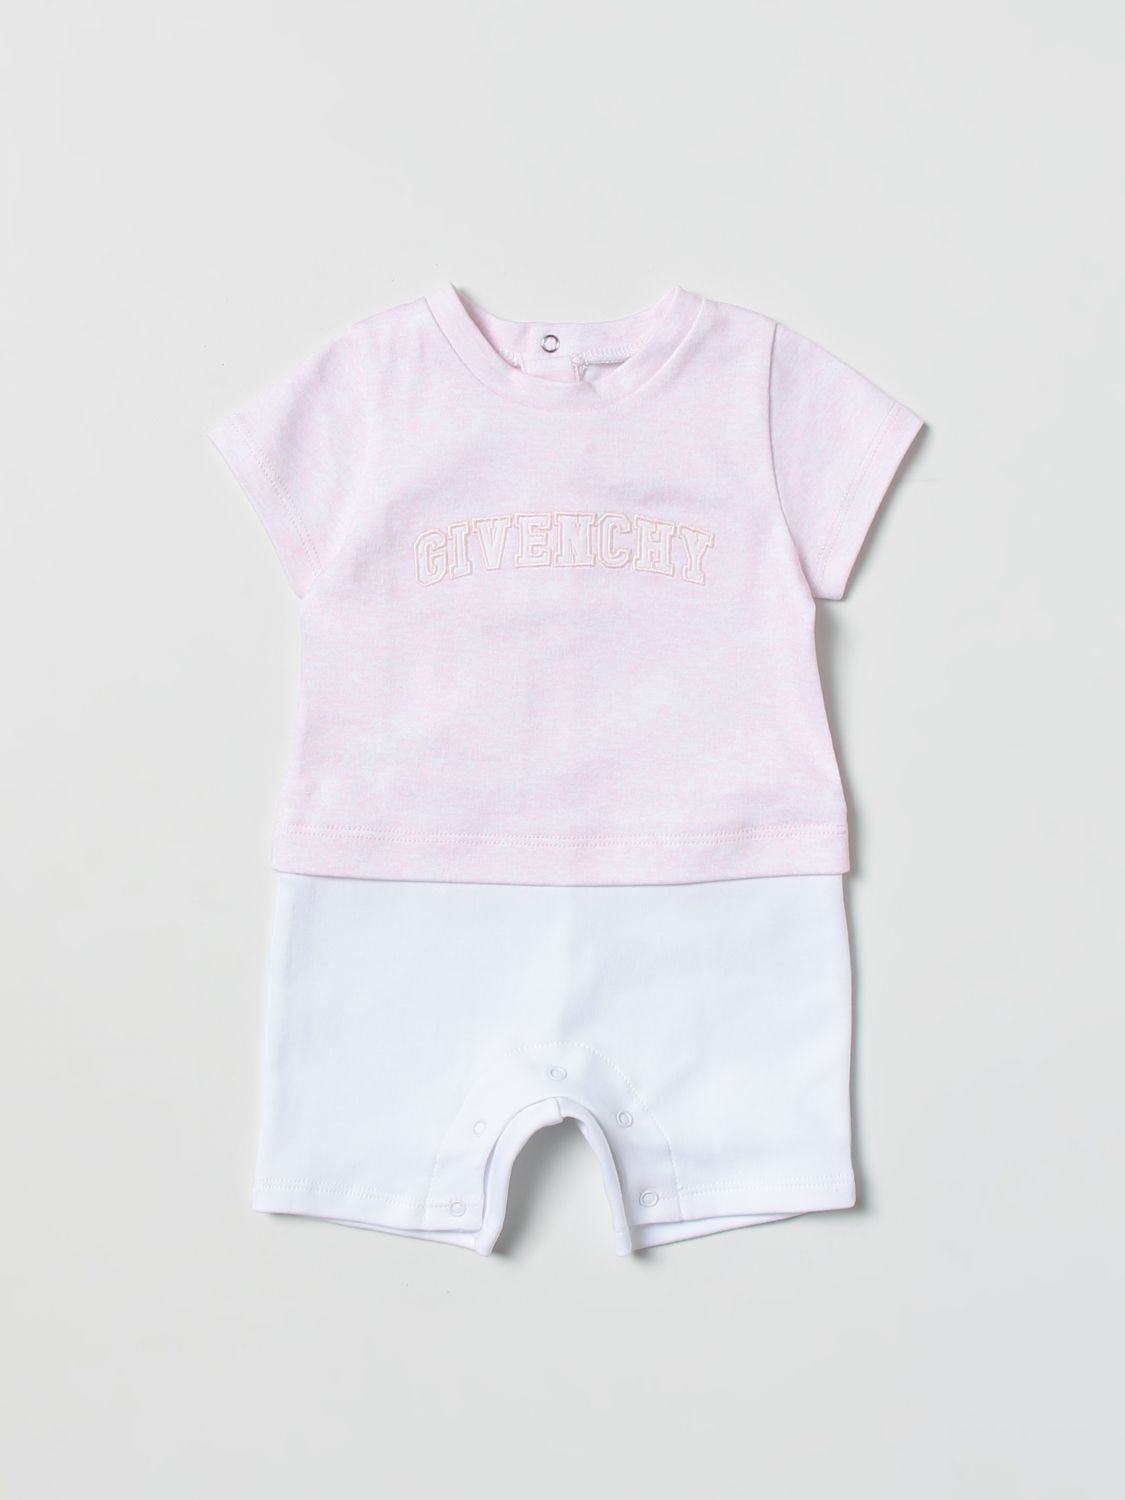 Givenchy Babies' Sweater  Kids Color Cream